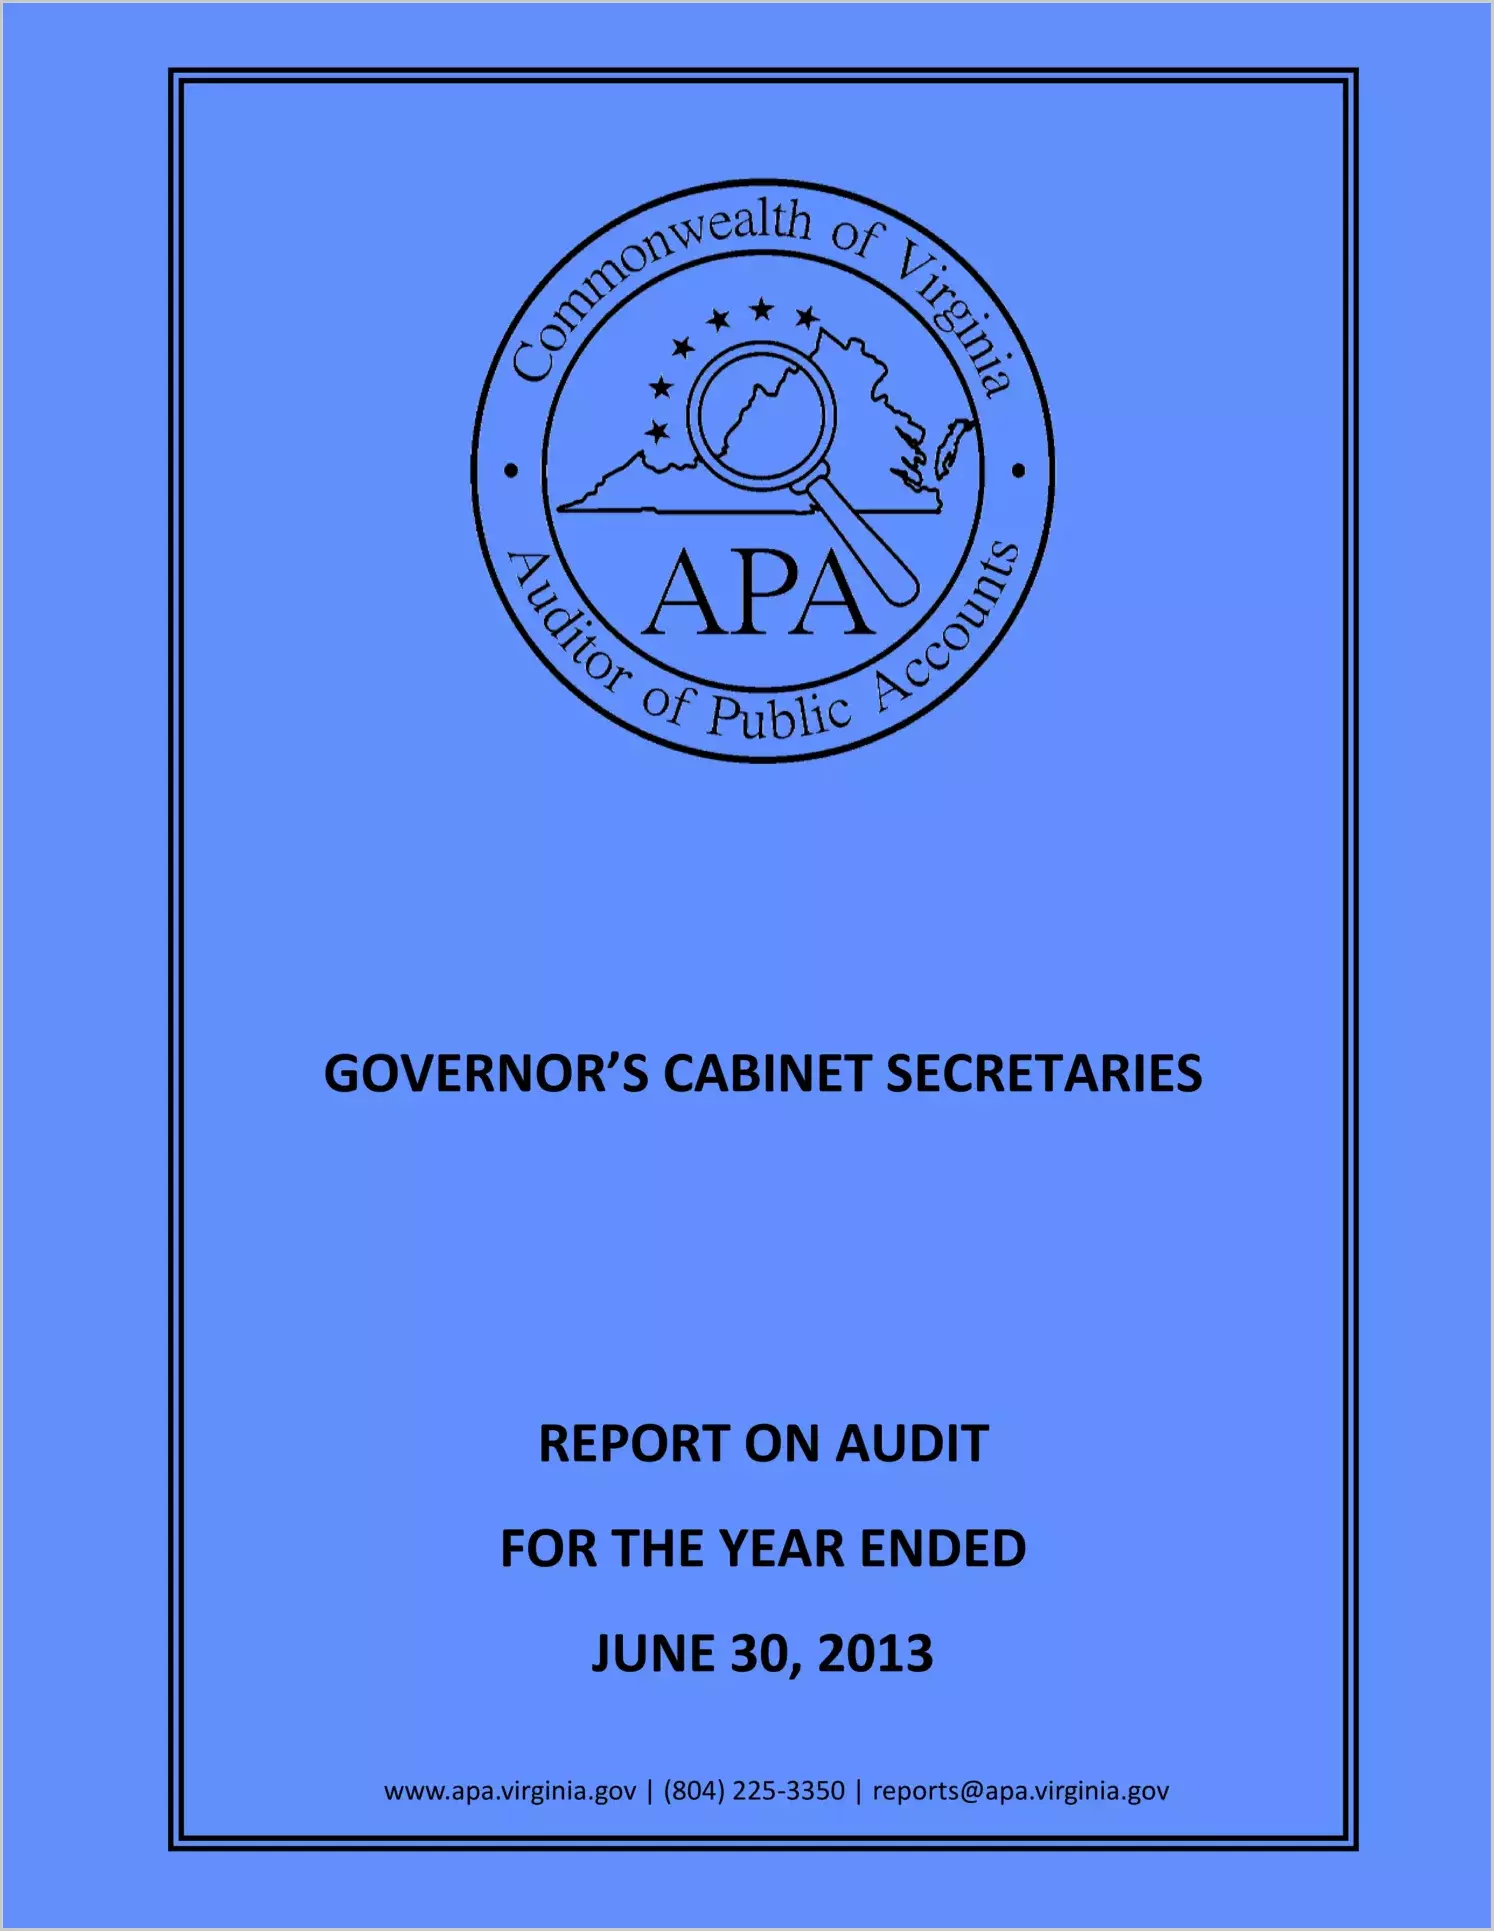 Governor? Cabinet Secretaries for the year ended June 30, 2013